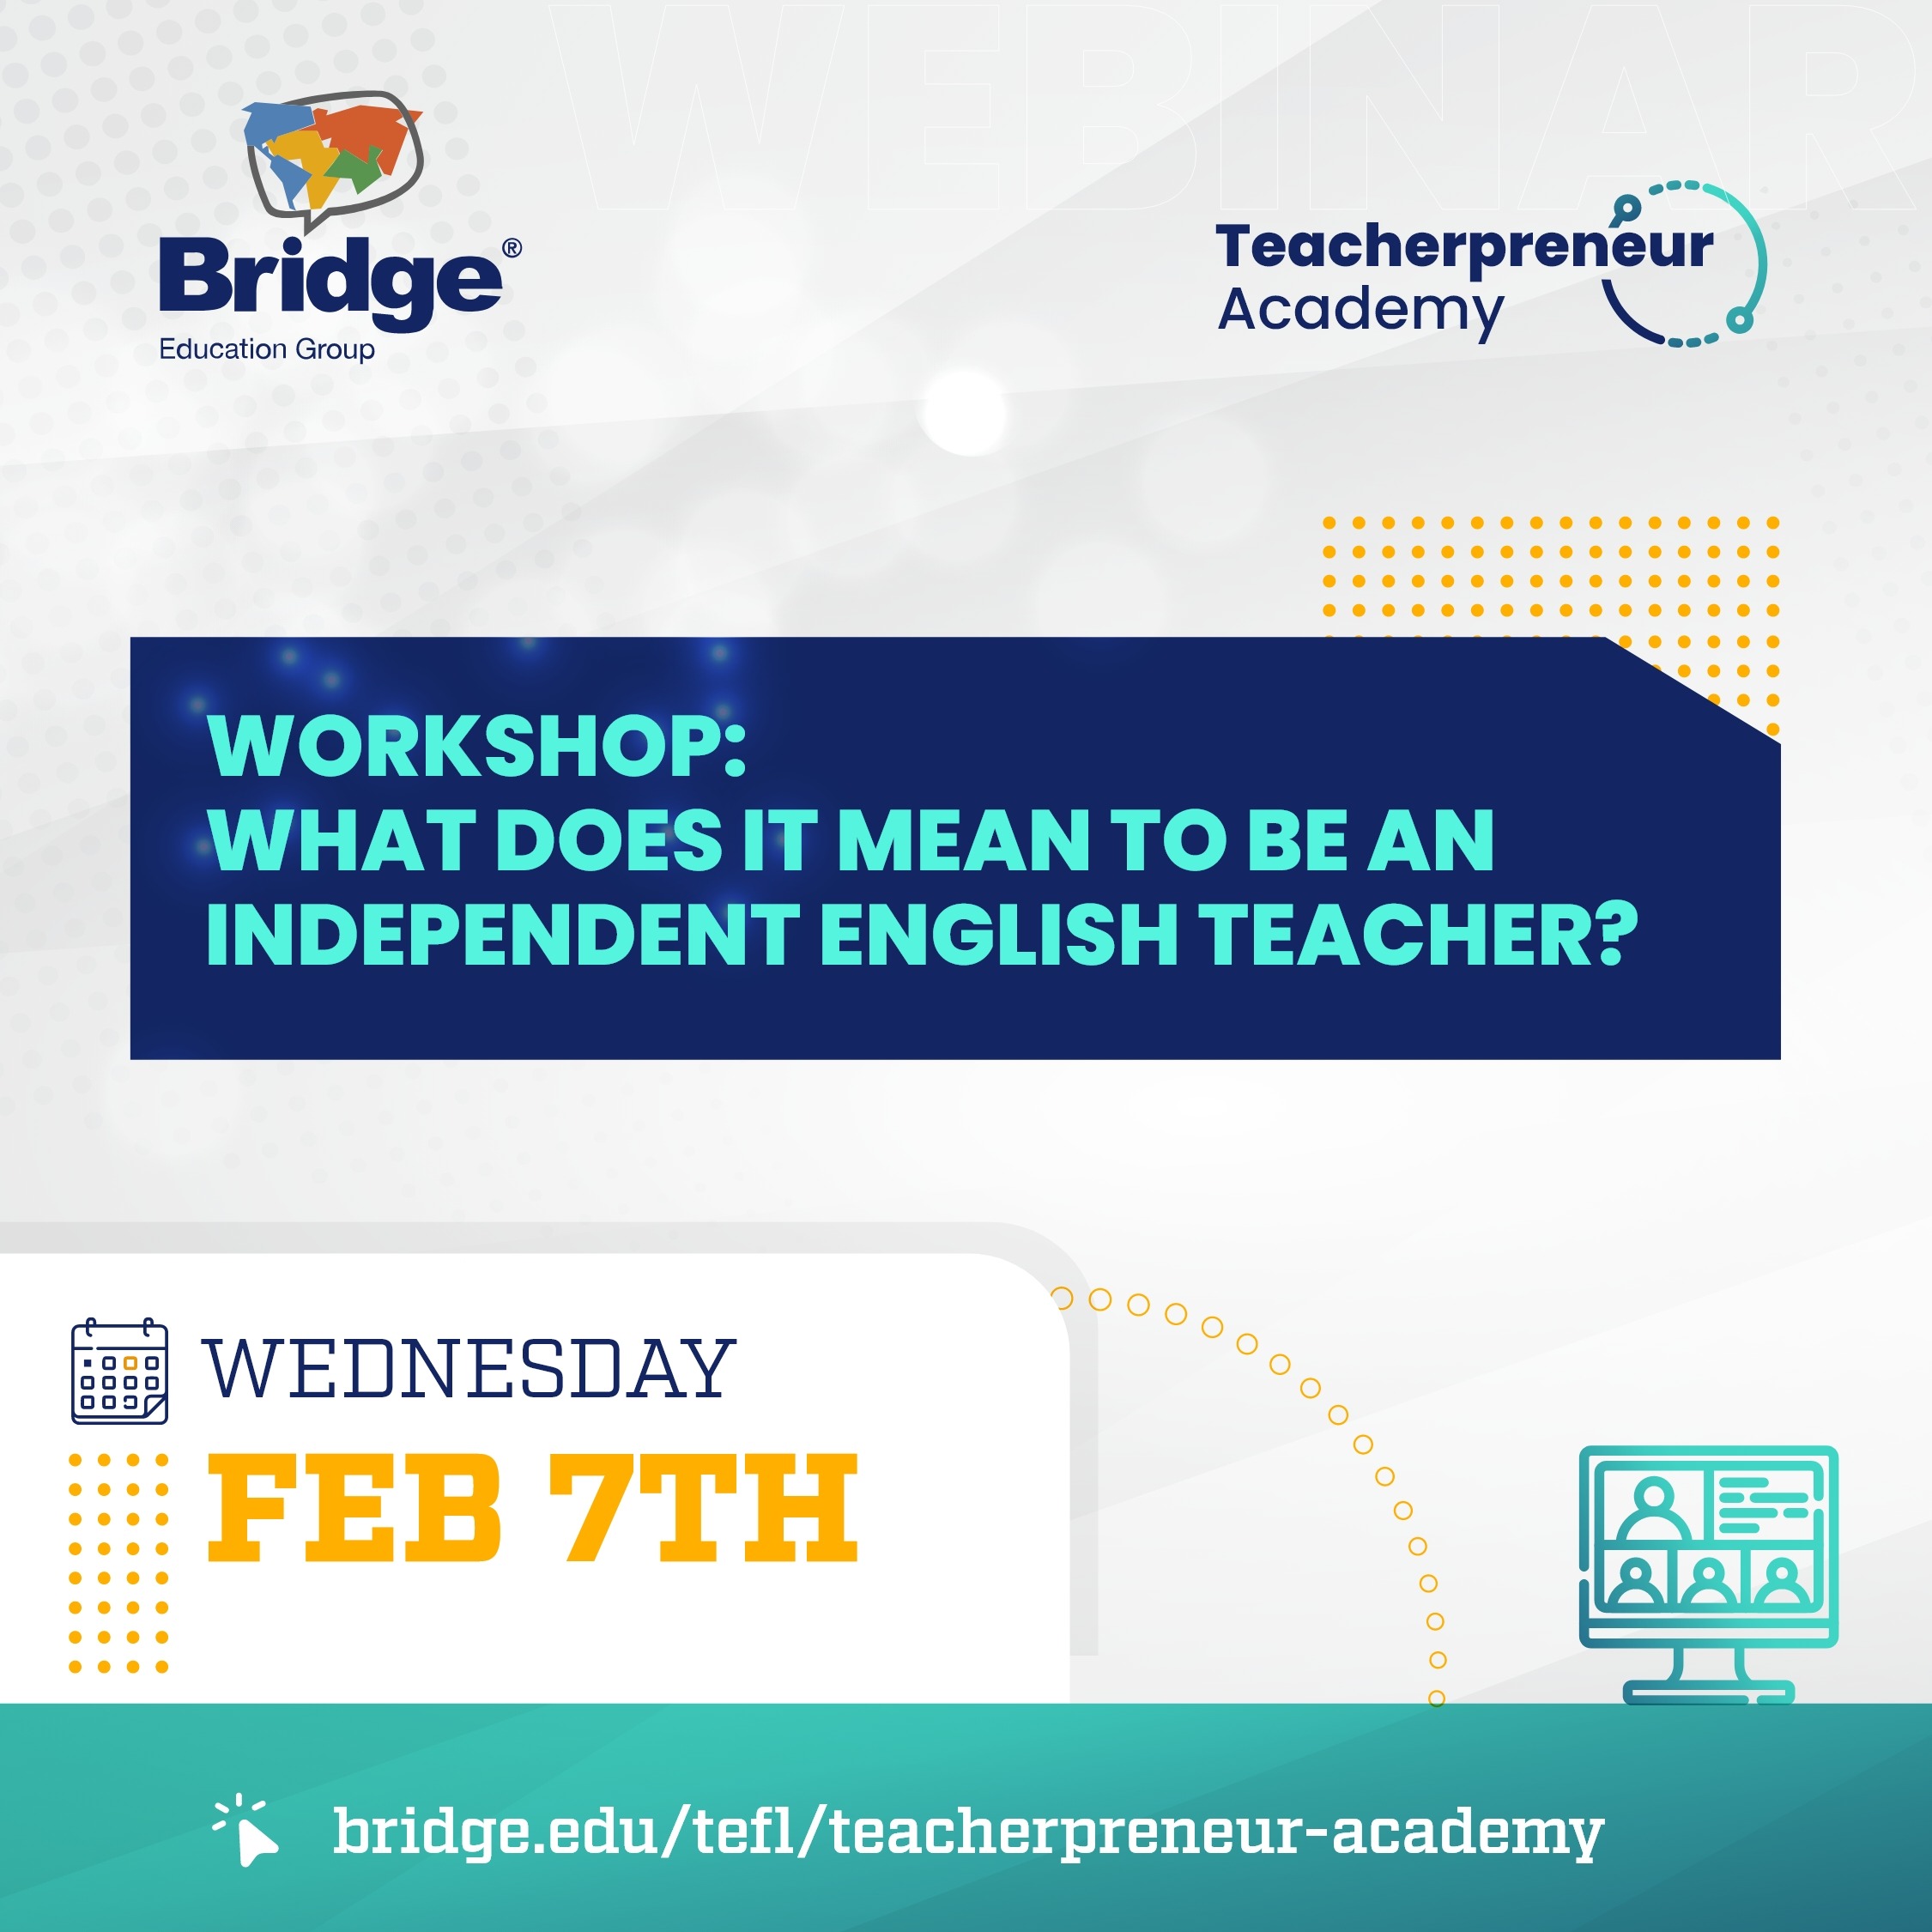 Workshop: What Does it Mean to be an Independent English Teacher?